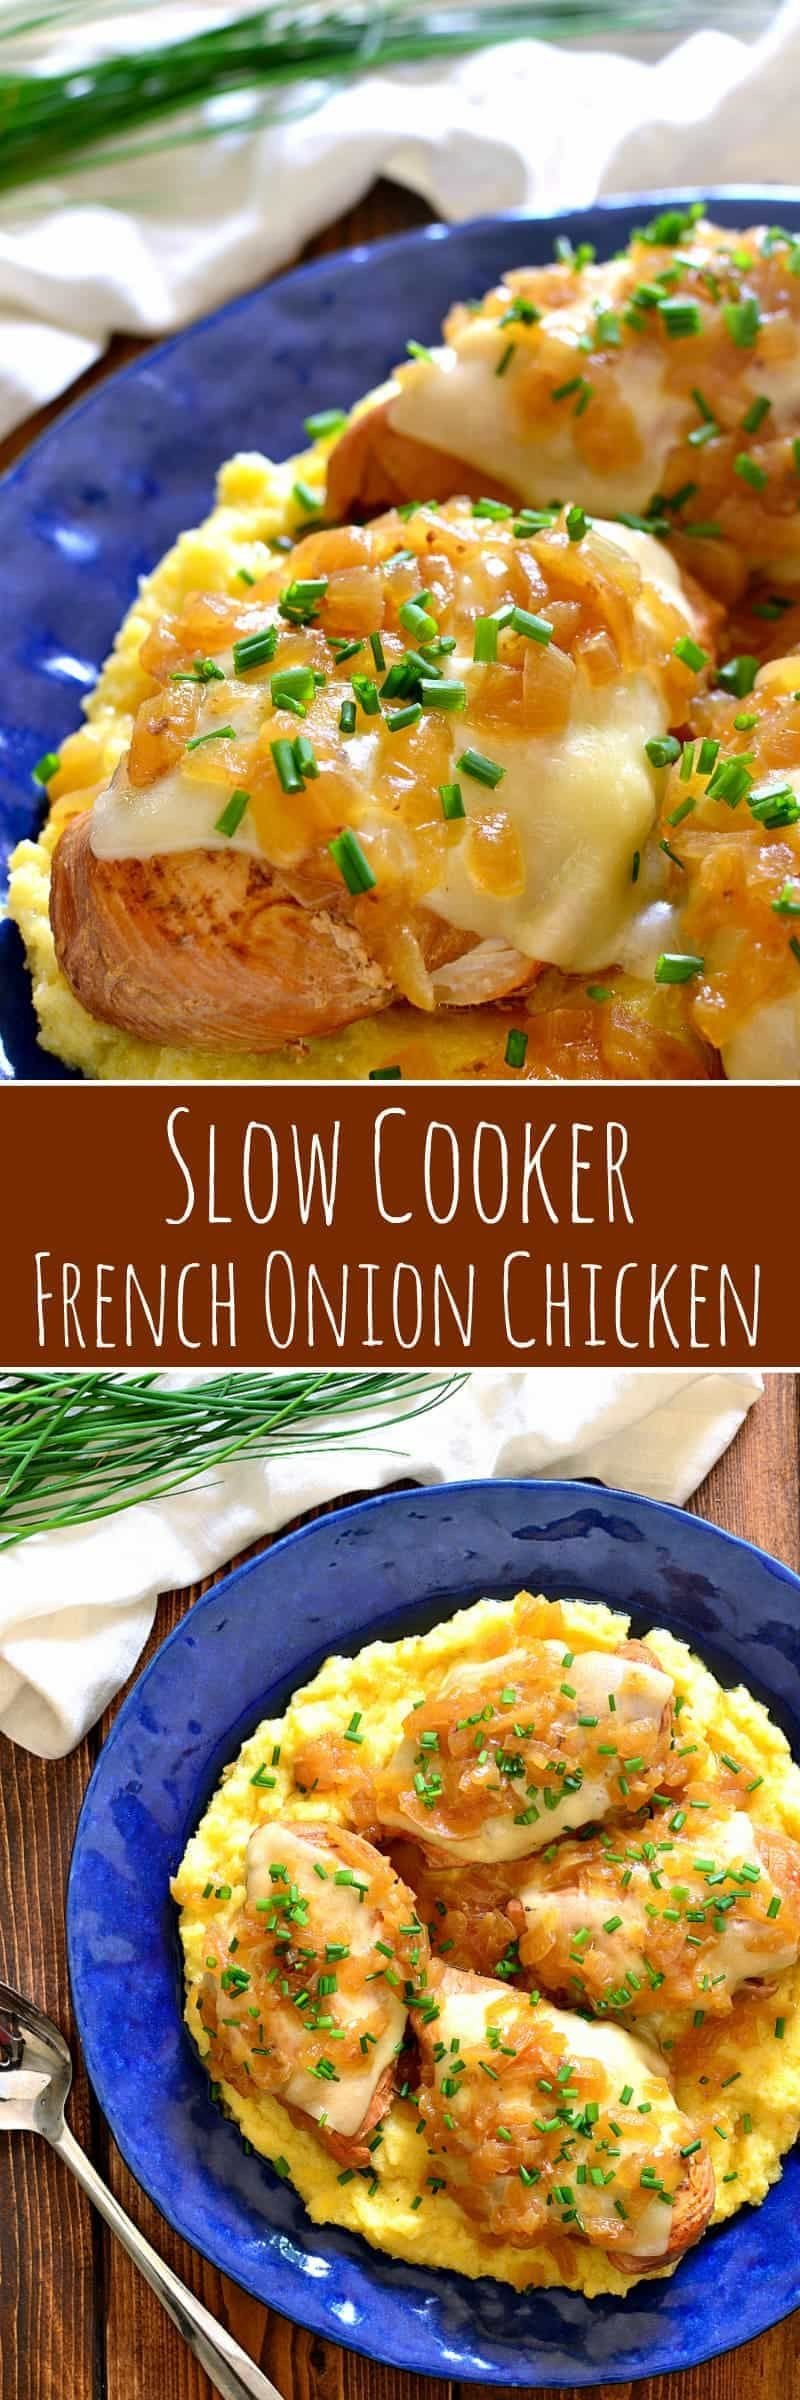 Onion Soup Mix Chicken Slow Cooker
 Slow Cooker French ion Chicken is packed with the